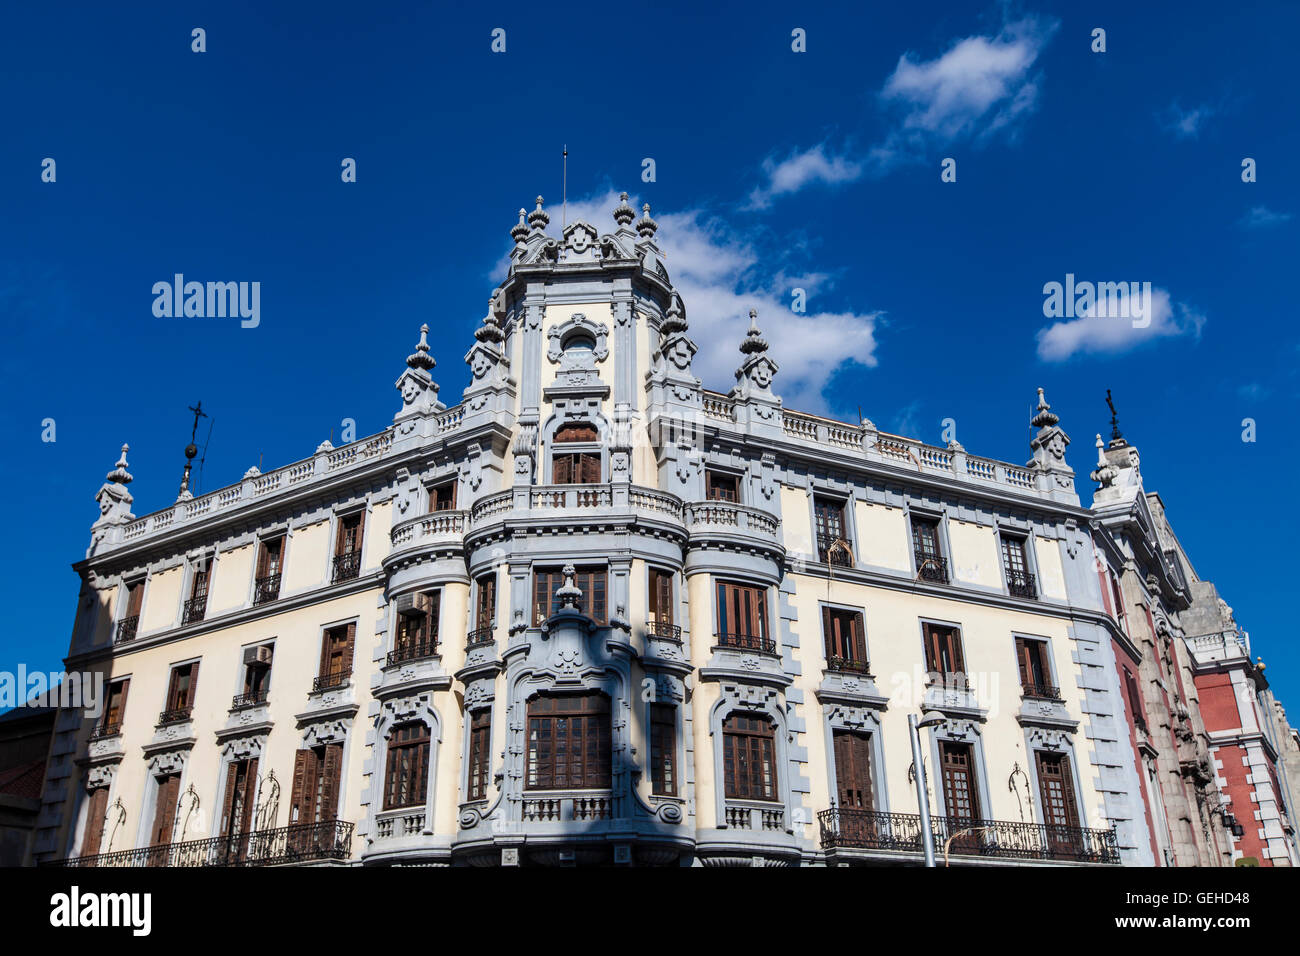 MADRID, SPAIN- MARCH 16, 2016: Gran Vía is an ornate and upscale shopping street located in central Madrid. Street is known as t Stock Photo